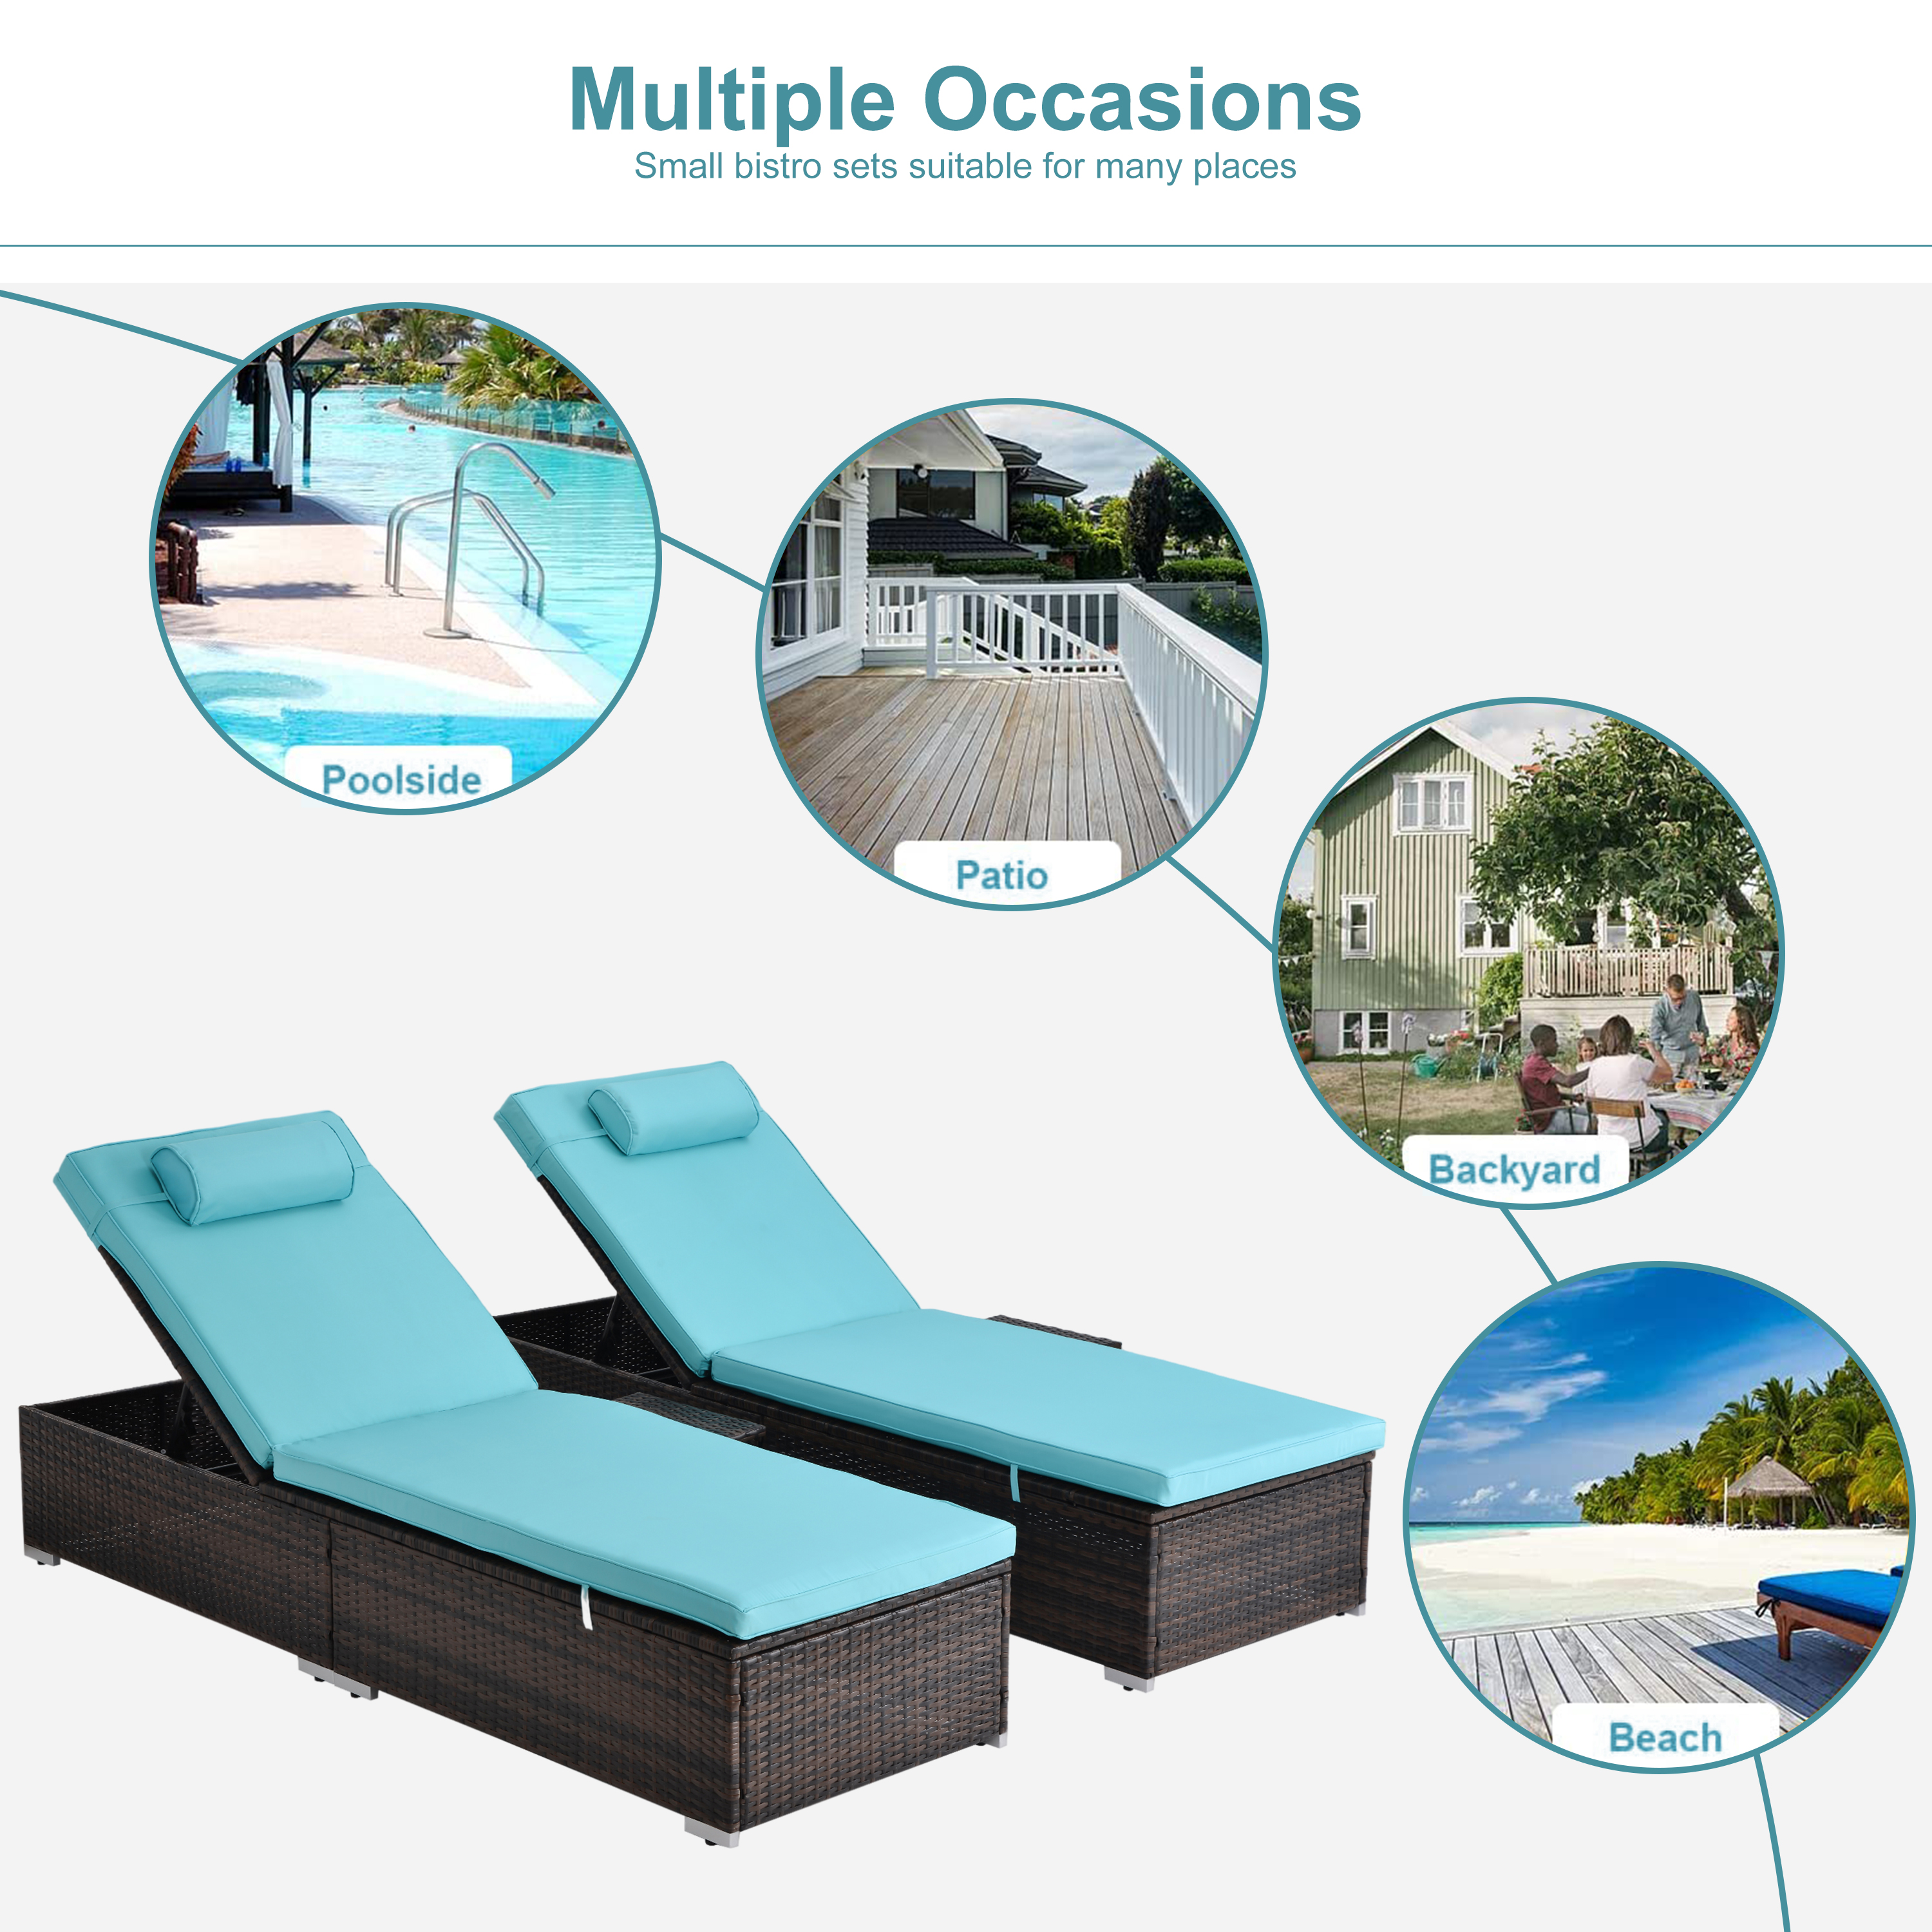 Segmart Patio Lounge Chairs Furniture Set, Adjustable Pool Reclining Chaise Lounge Chairs with Side Table, Folding Outdoor Recliners for Outside, Blue, SS2345 - image 3 of 8